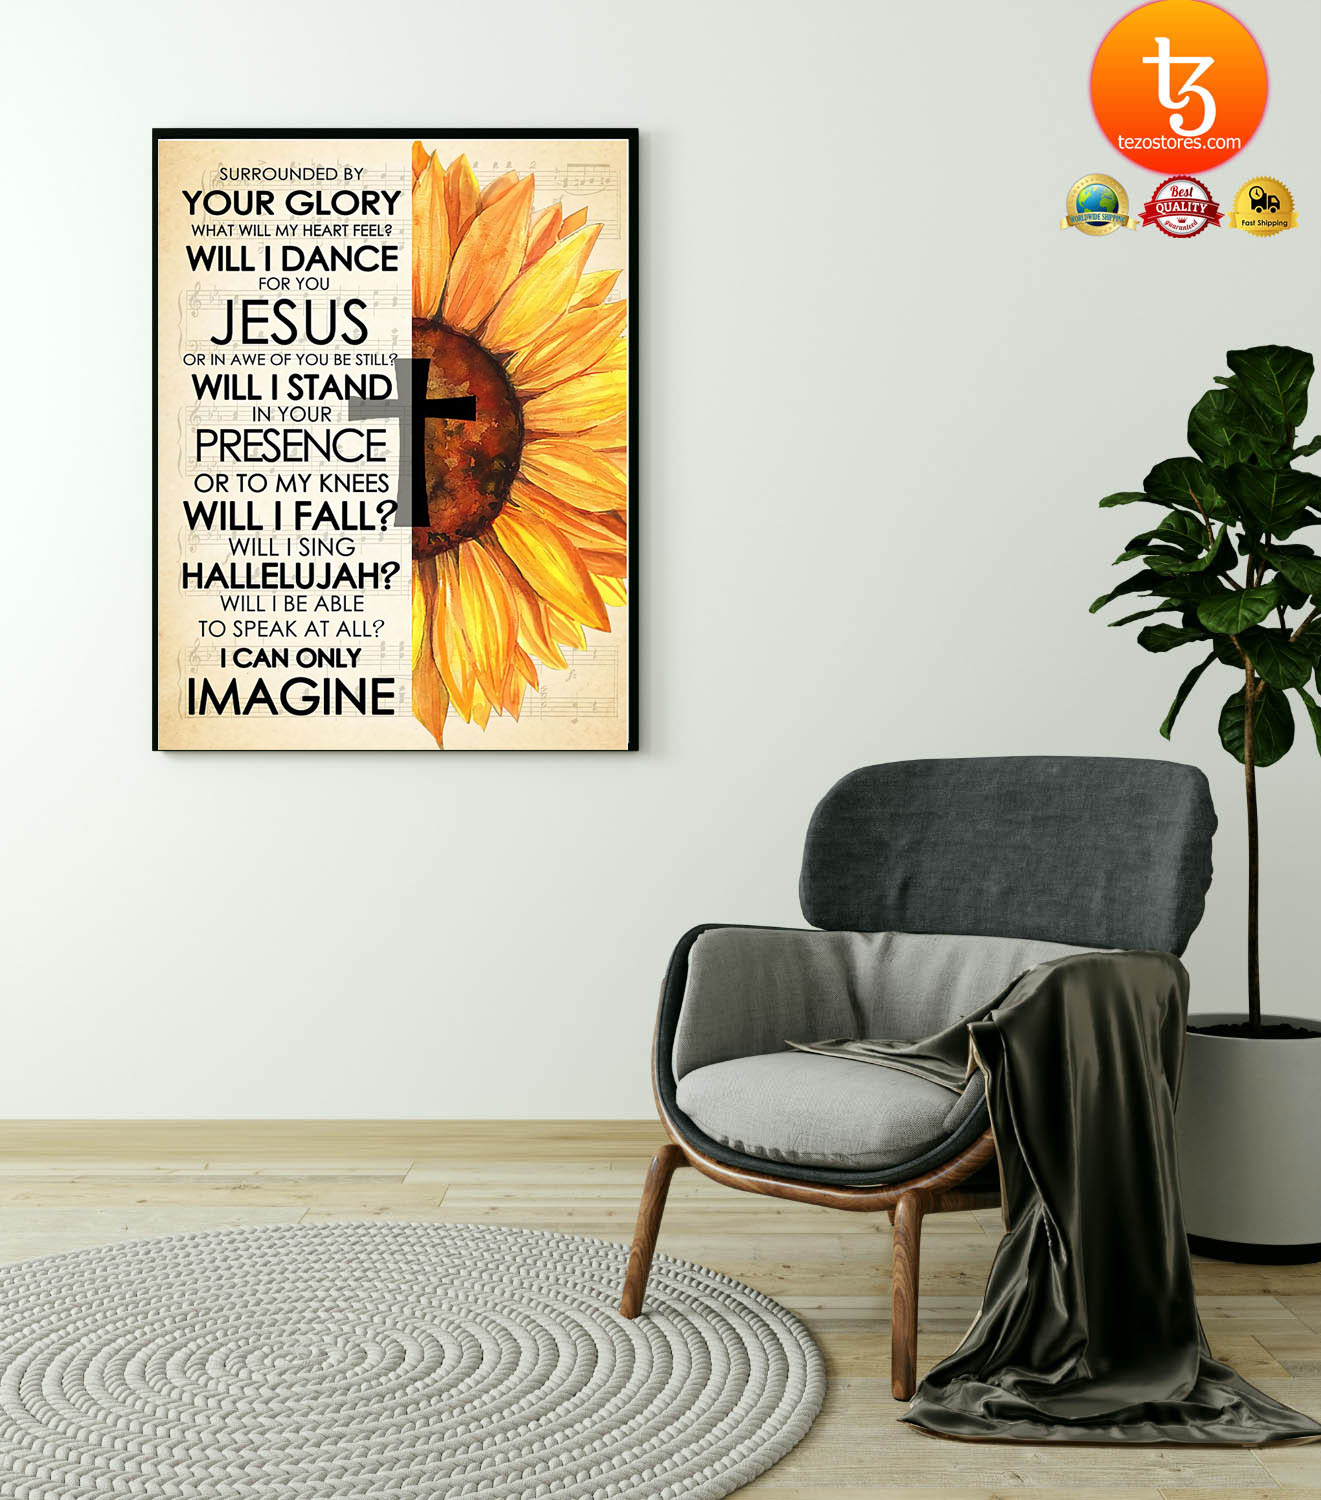 Surrounded by your glory what will my heart feel will I dance for you jesus poster6